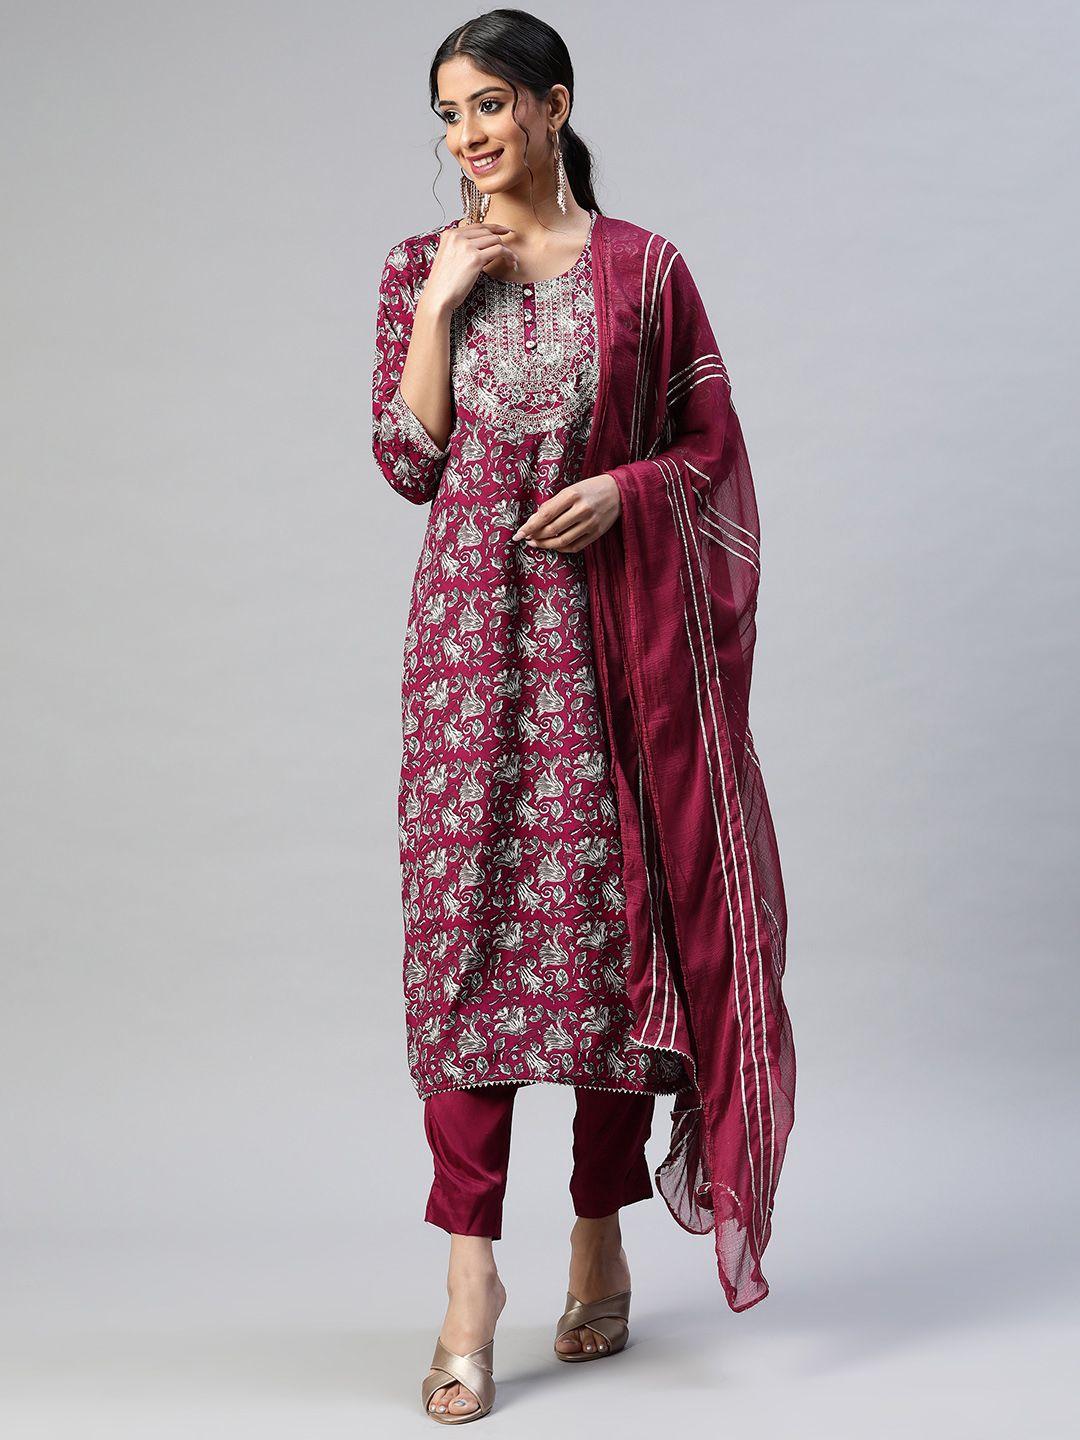 readiprint fashions women burgundy floral embroidered kurta with trousers & dupatta